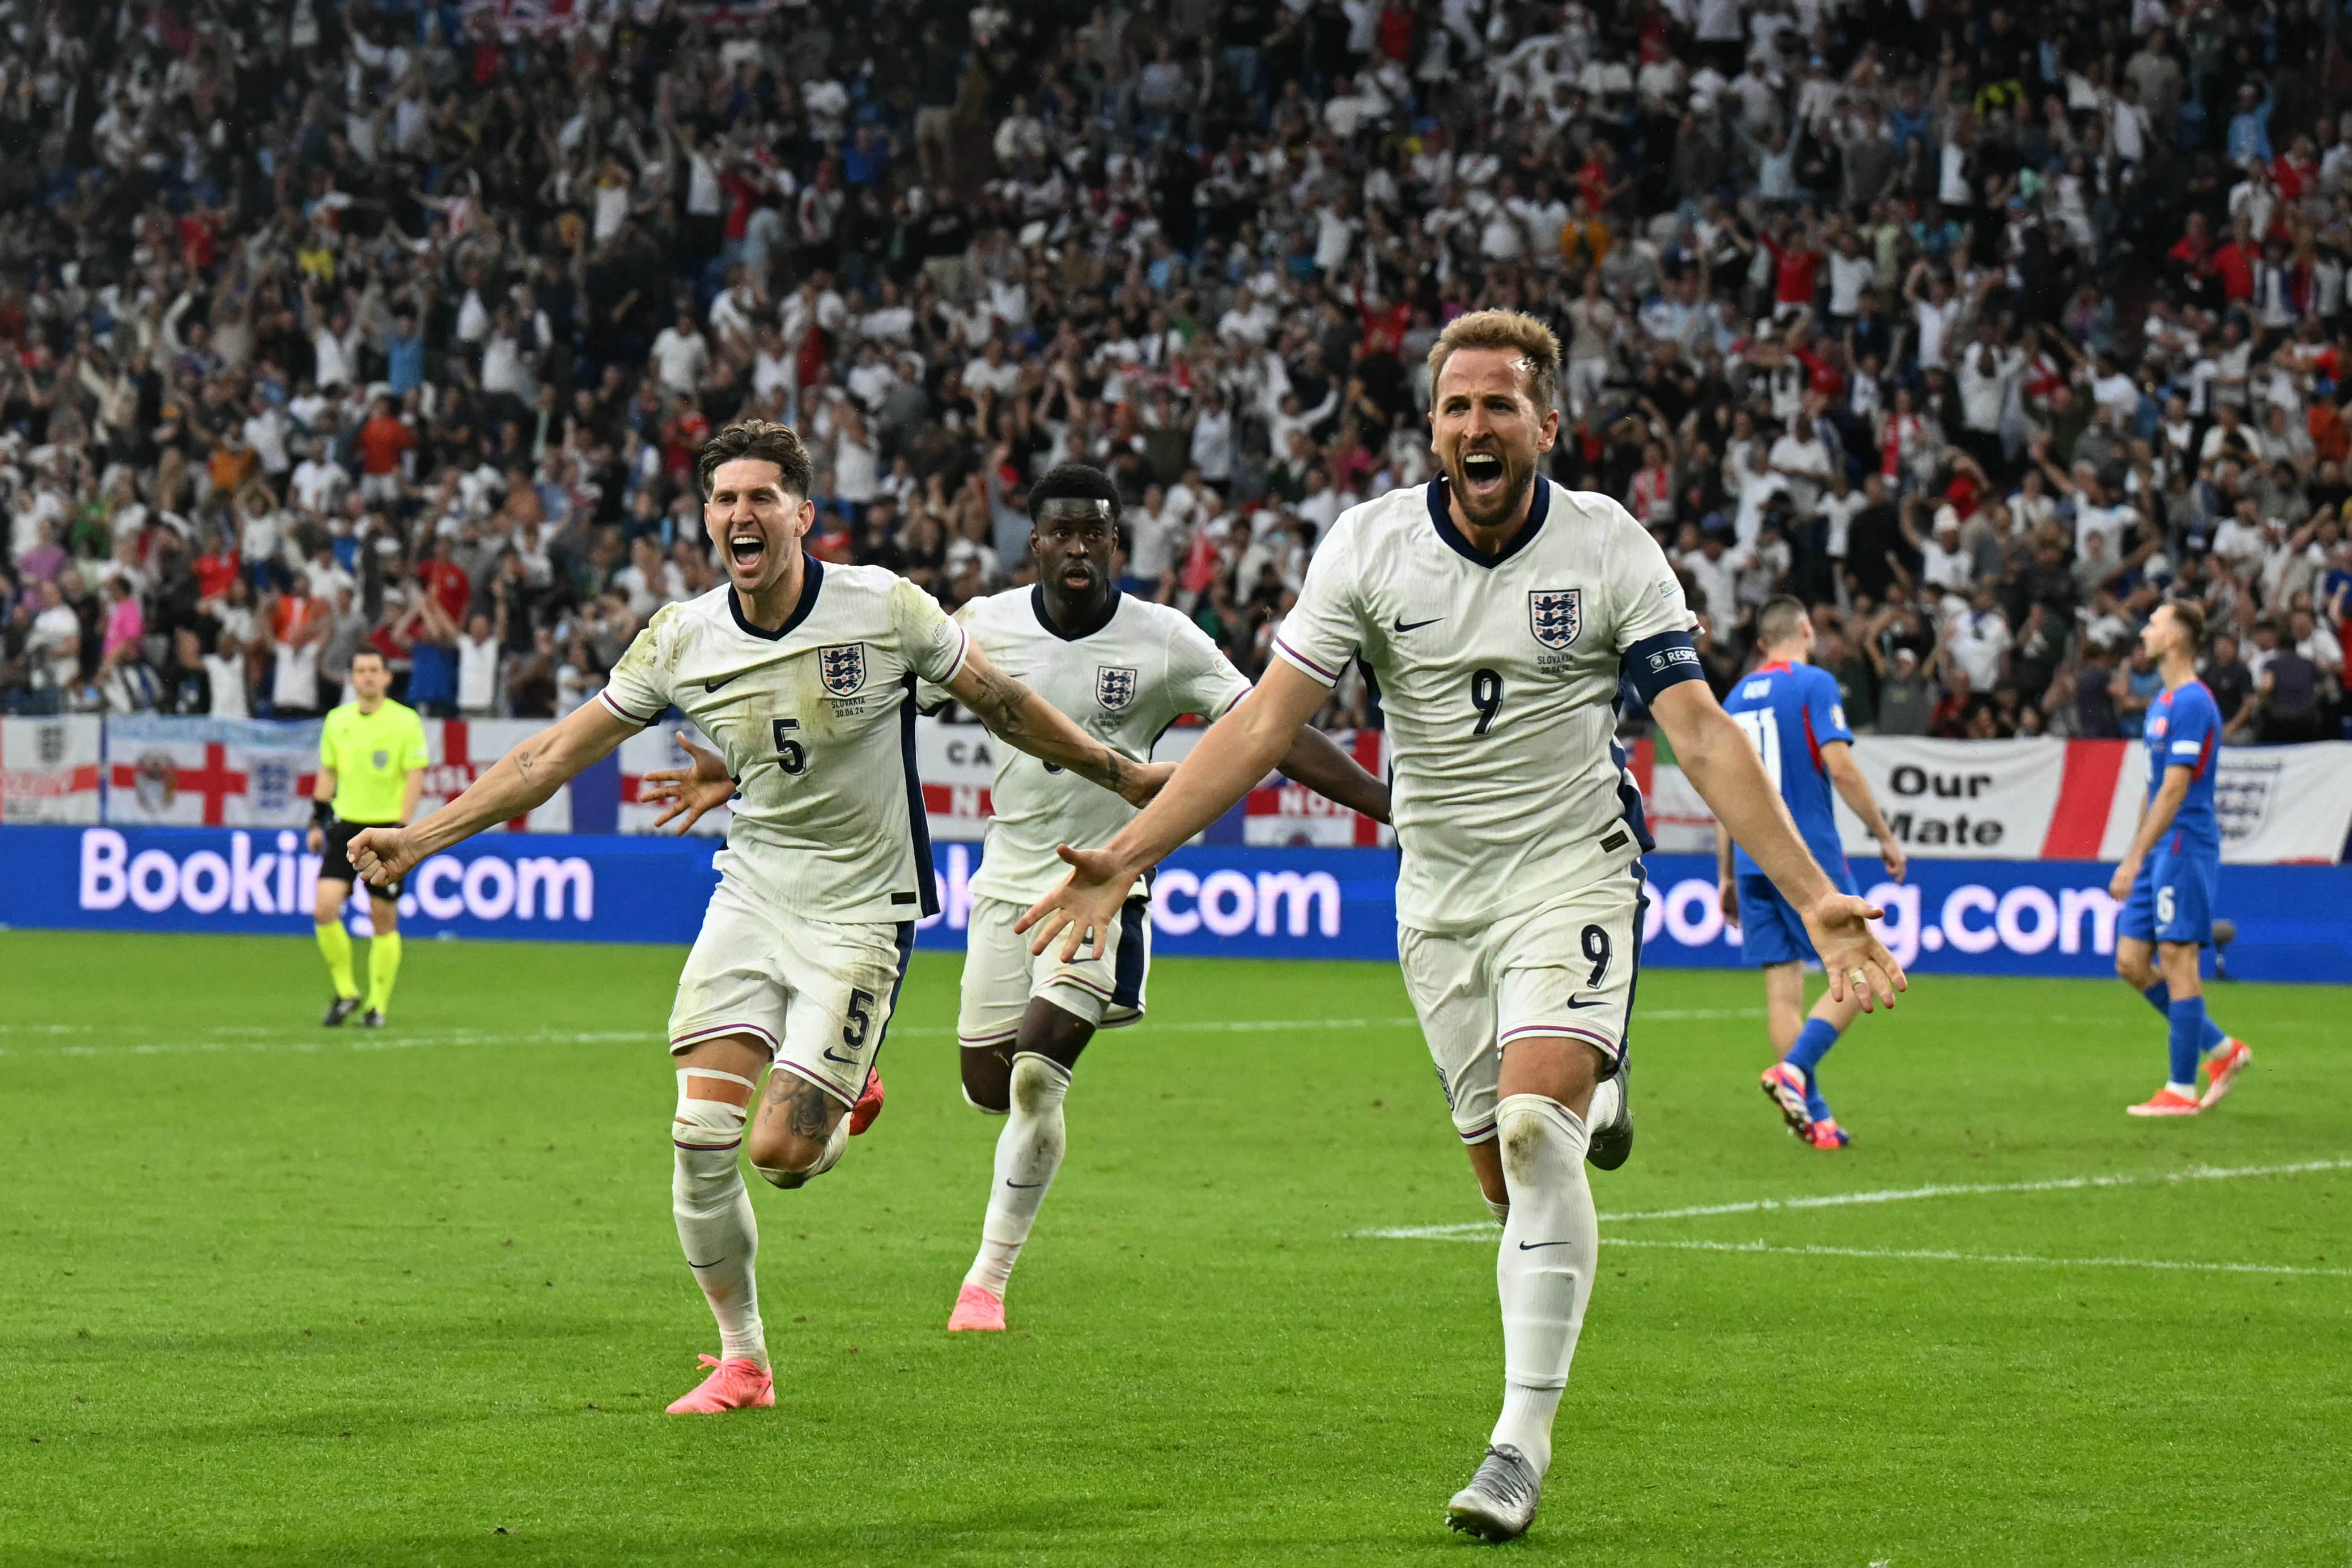 Harry Kane's winner in extra time means England face Switzerland in the quarter finals